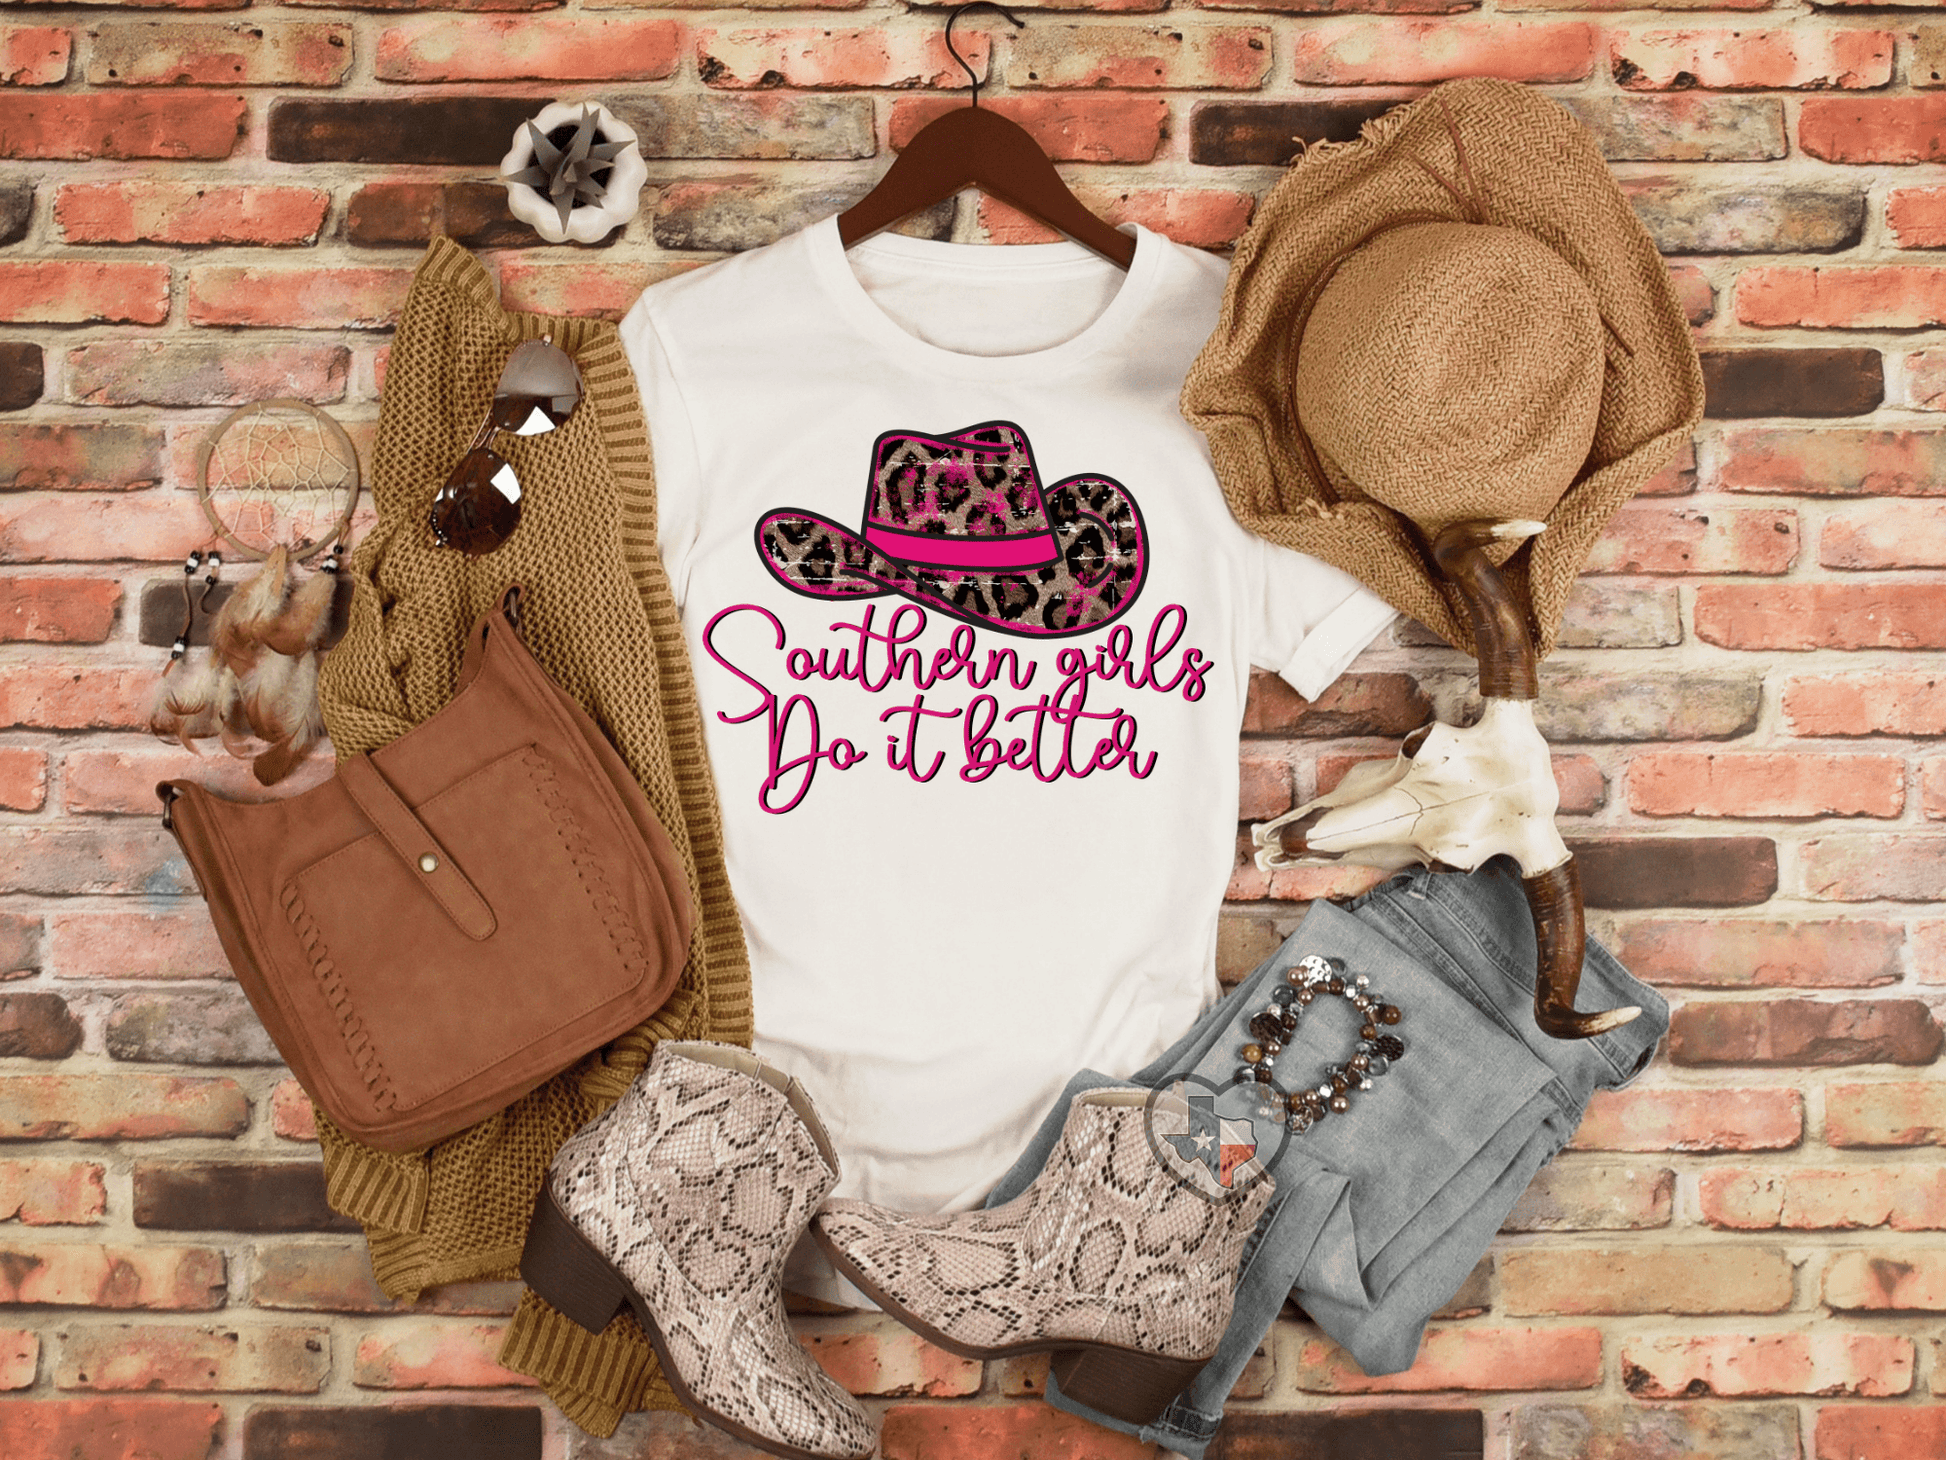 Southern Girls Do It Better HIGH HEAT - Texas Transfers and Designs